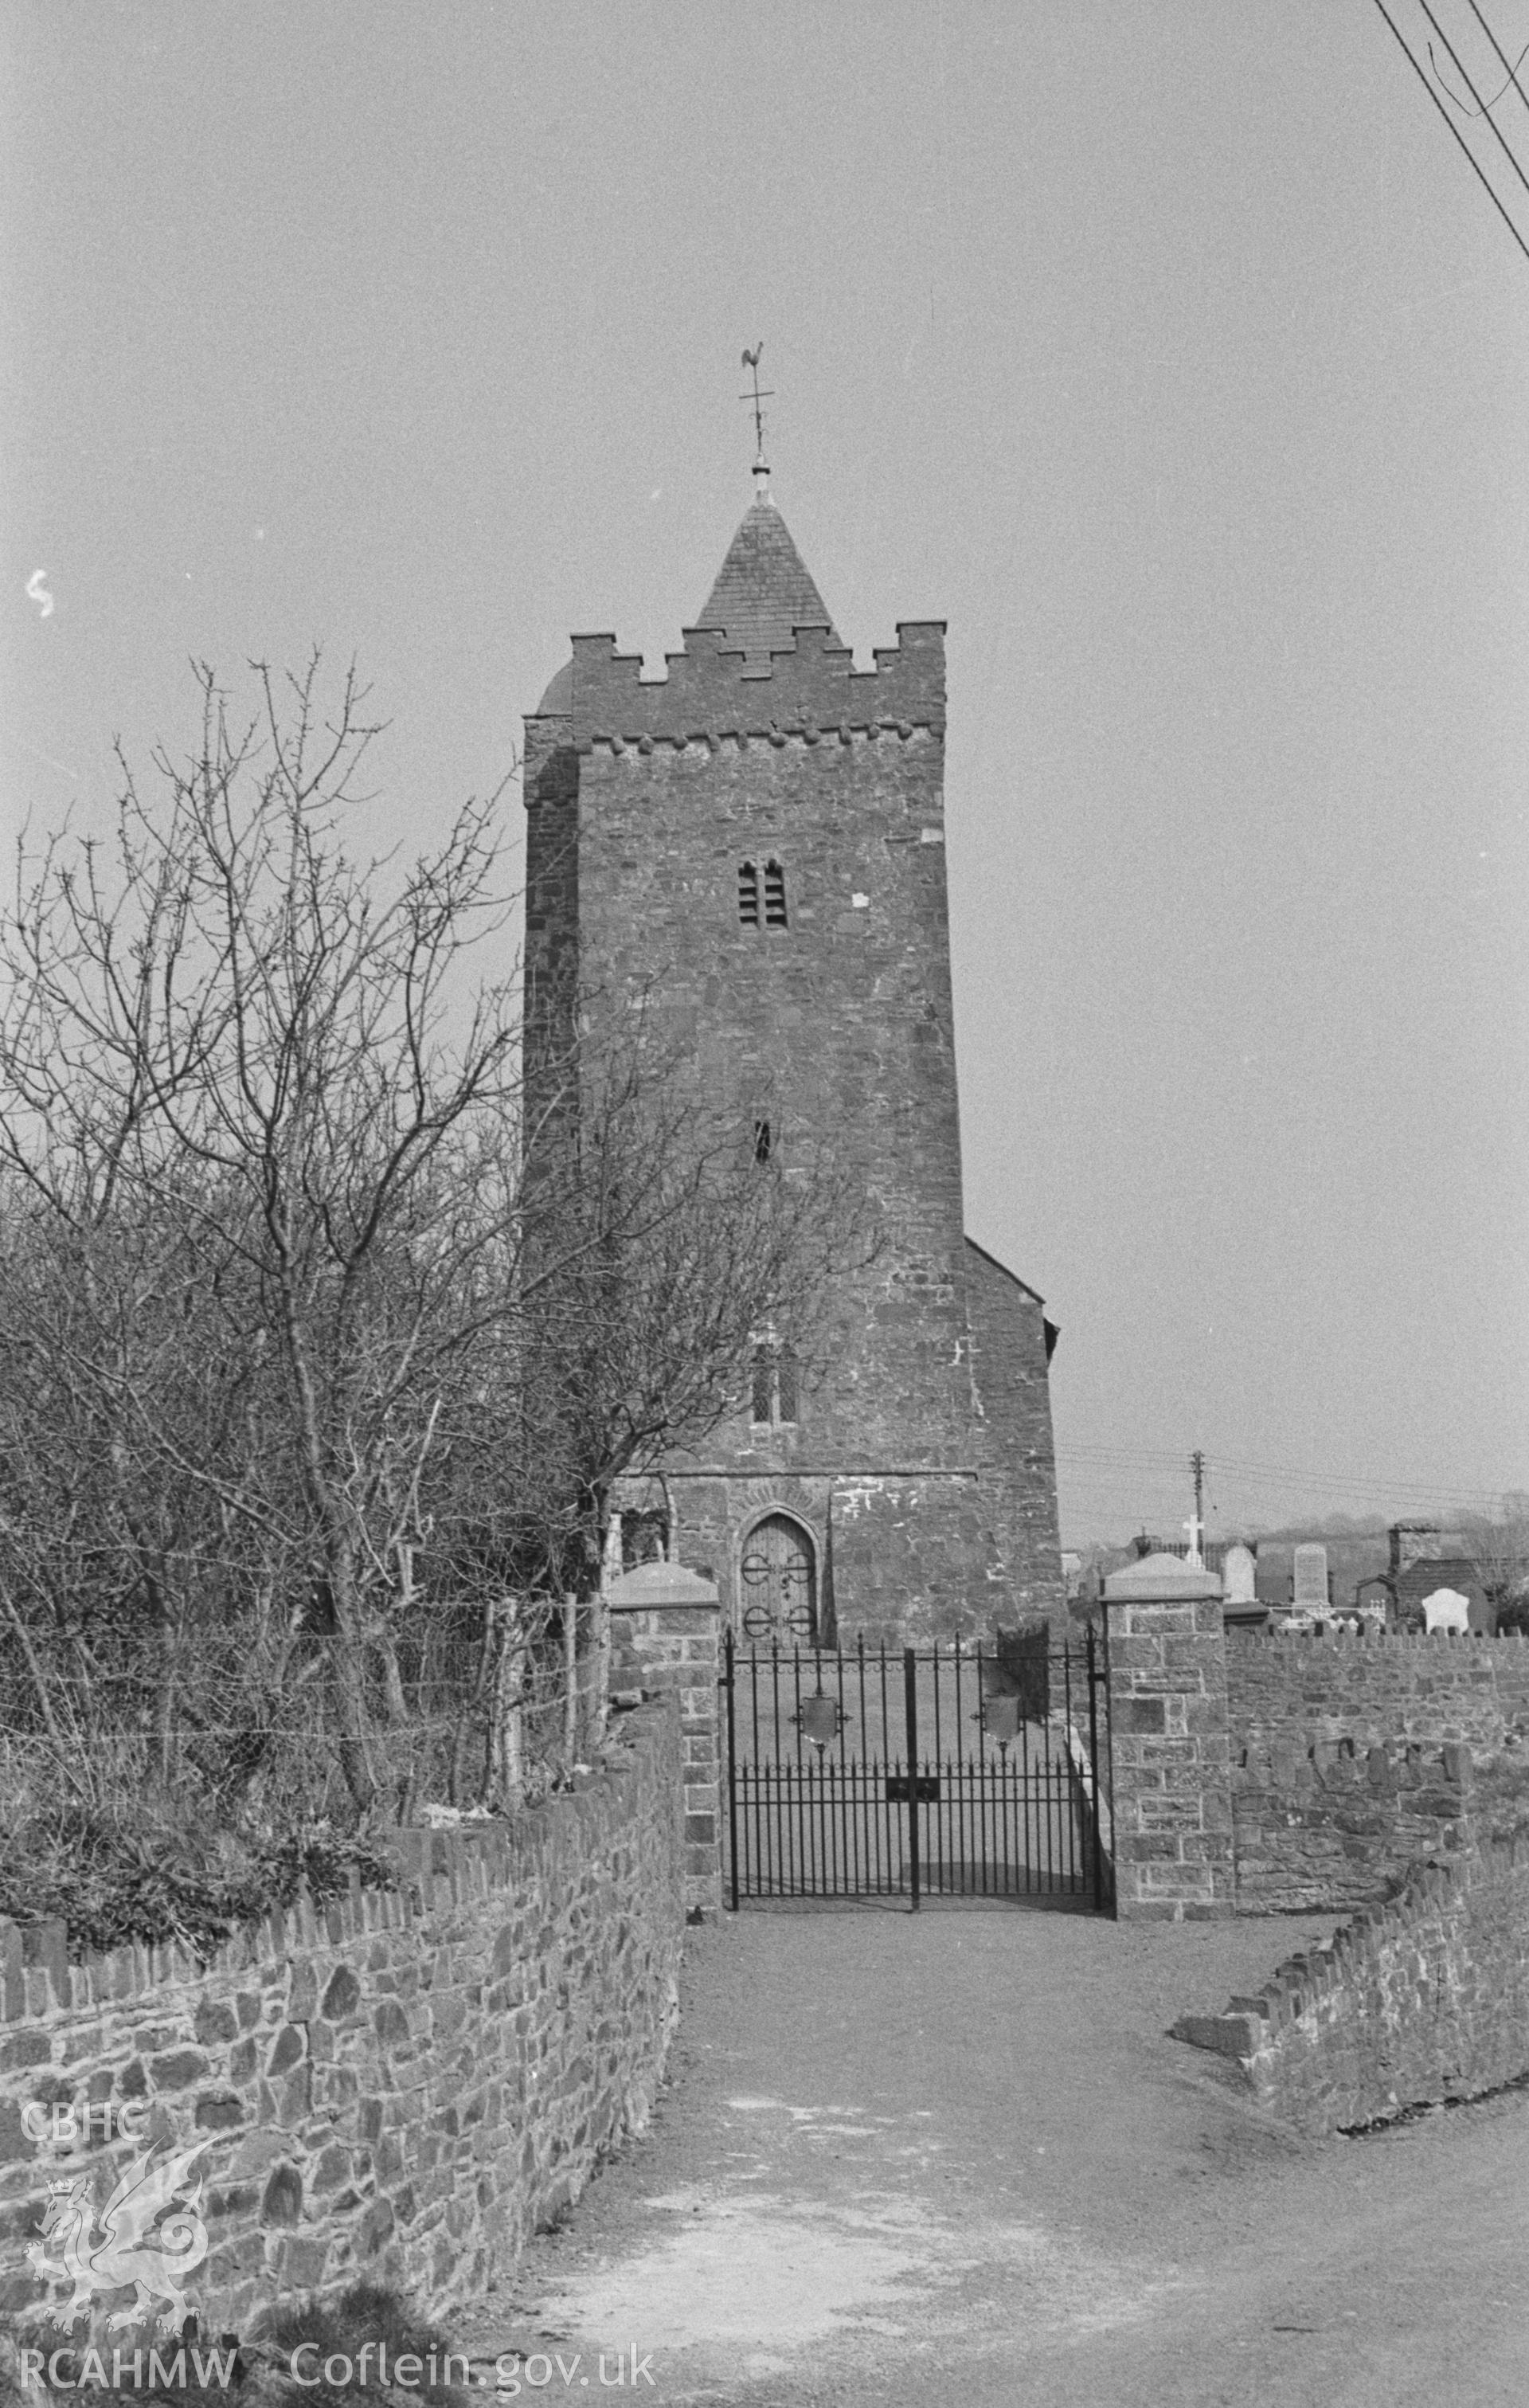 Black and White photograph showing St David's church, Llanarth. Photographed by Arthur Chater in April 1963 from Grid Reference SN 423 577, looking east.